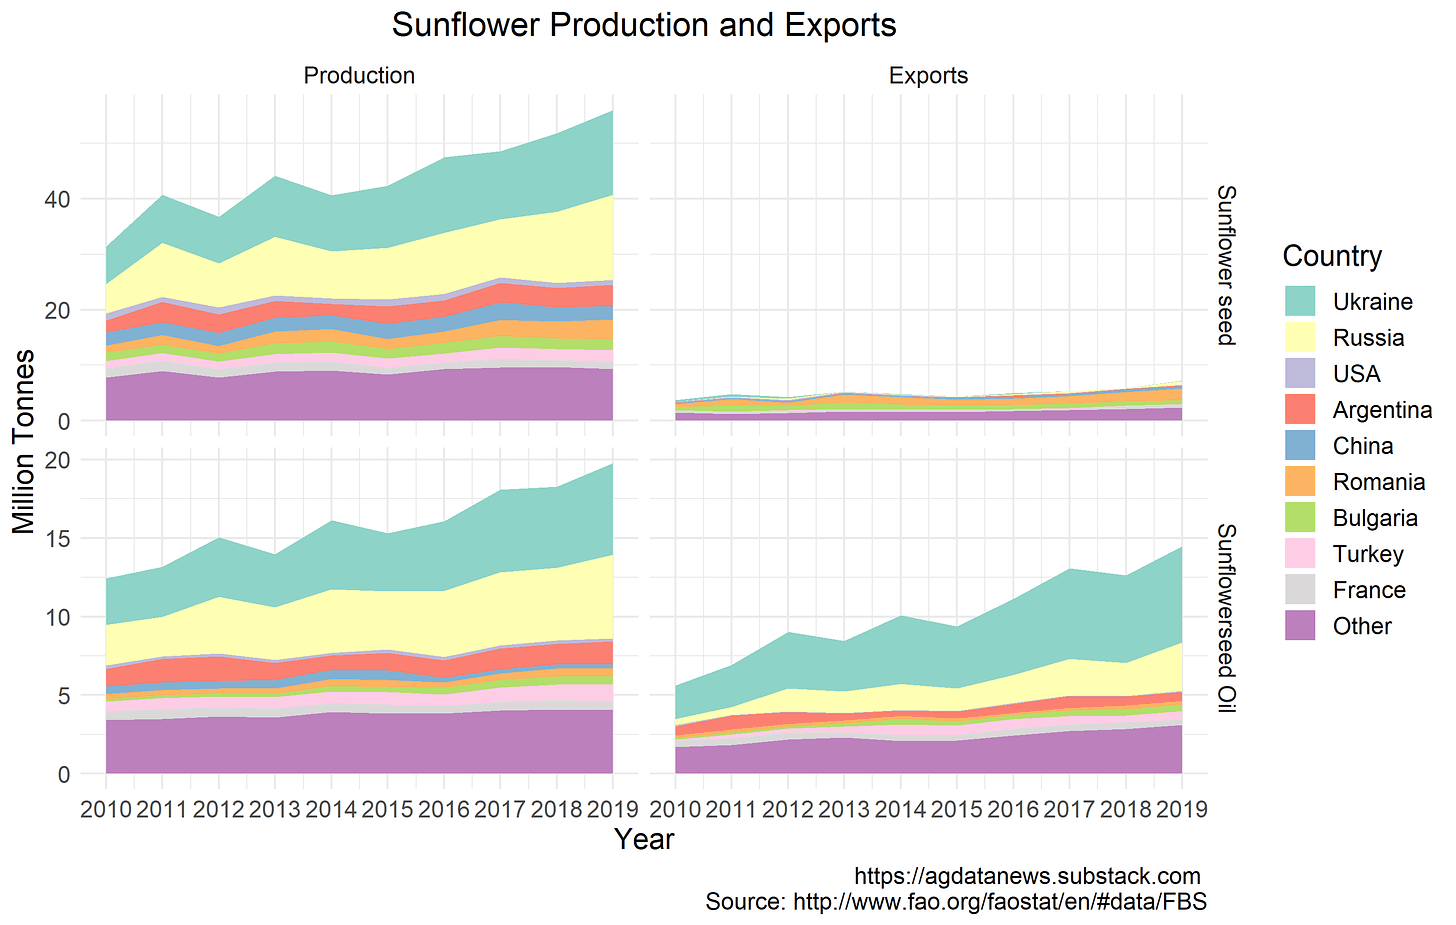 Sunflower production and exports